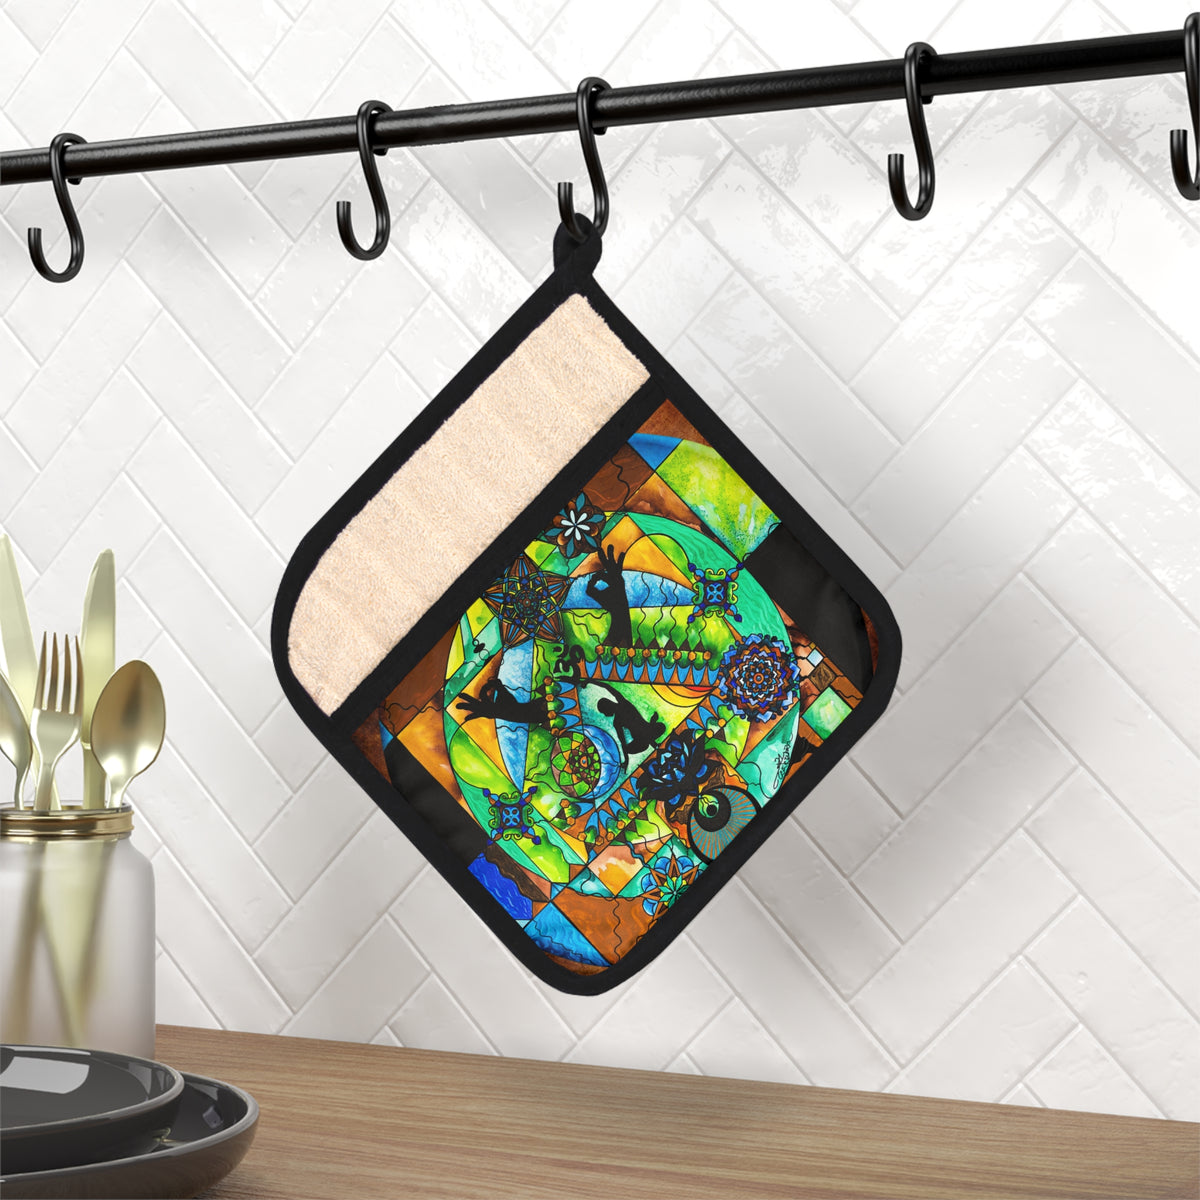 Stability Aid - Pot Holder with Pocket